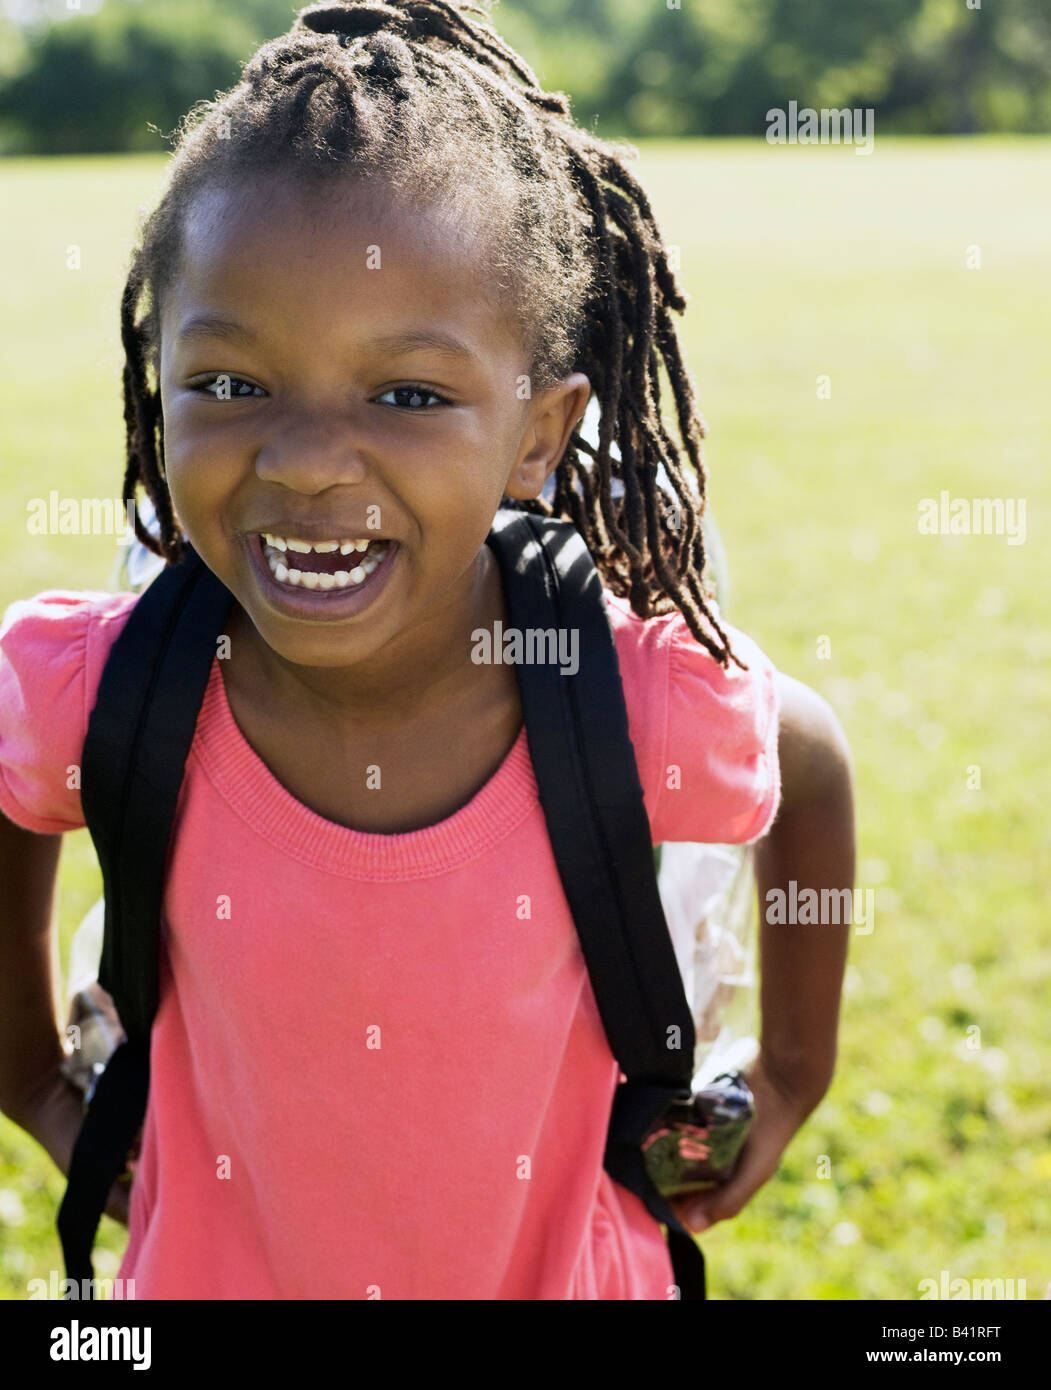 Young African American girl wearing backpack smiling at camera Banque D'Images